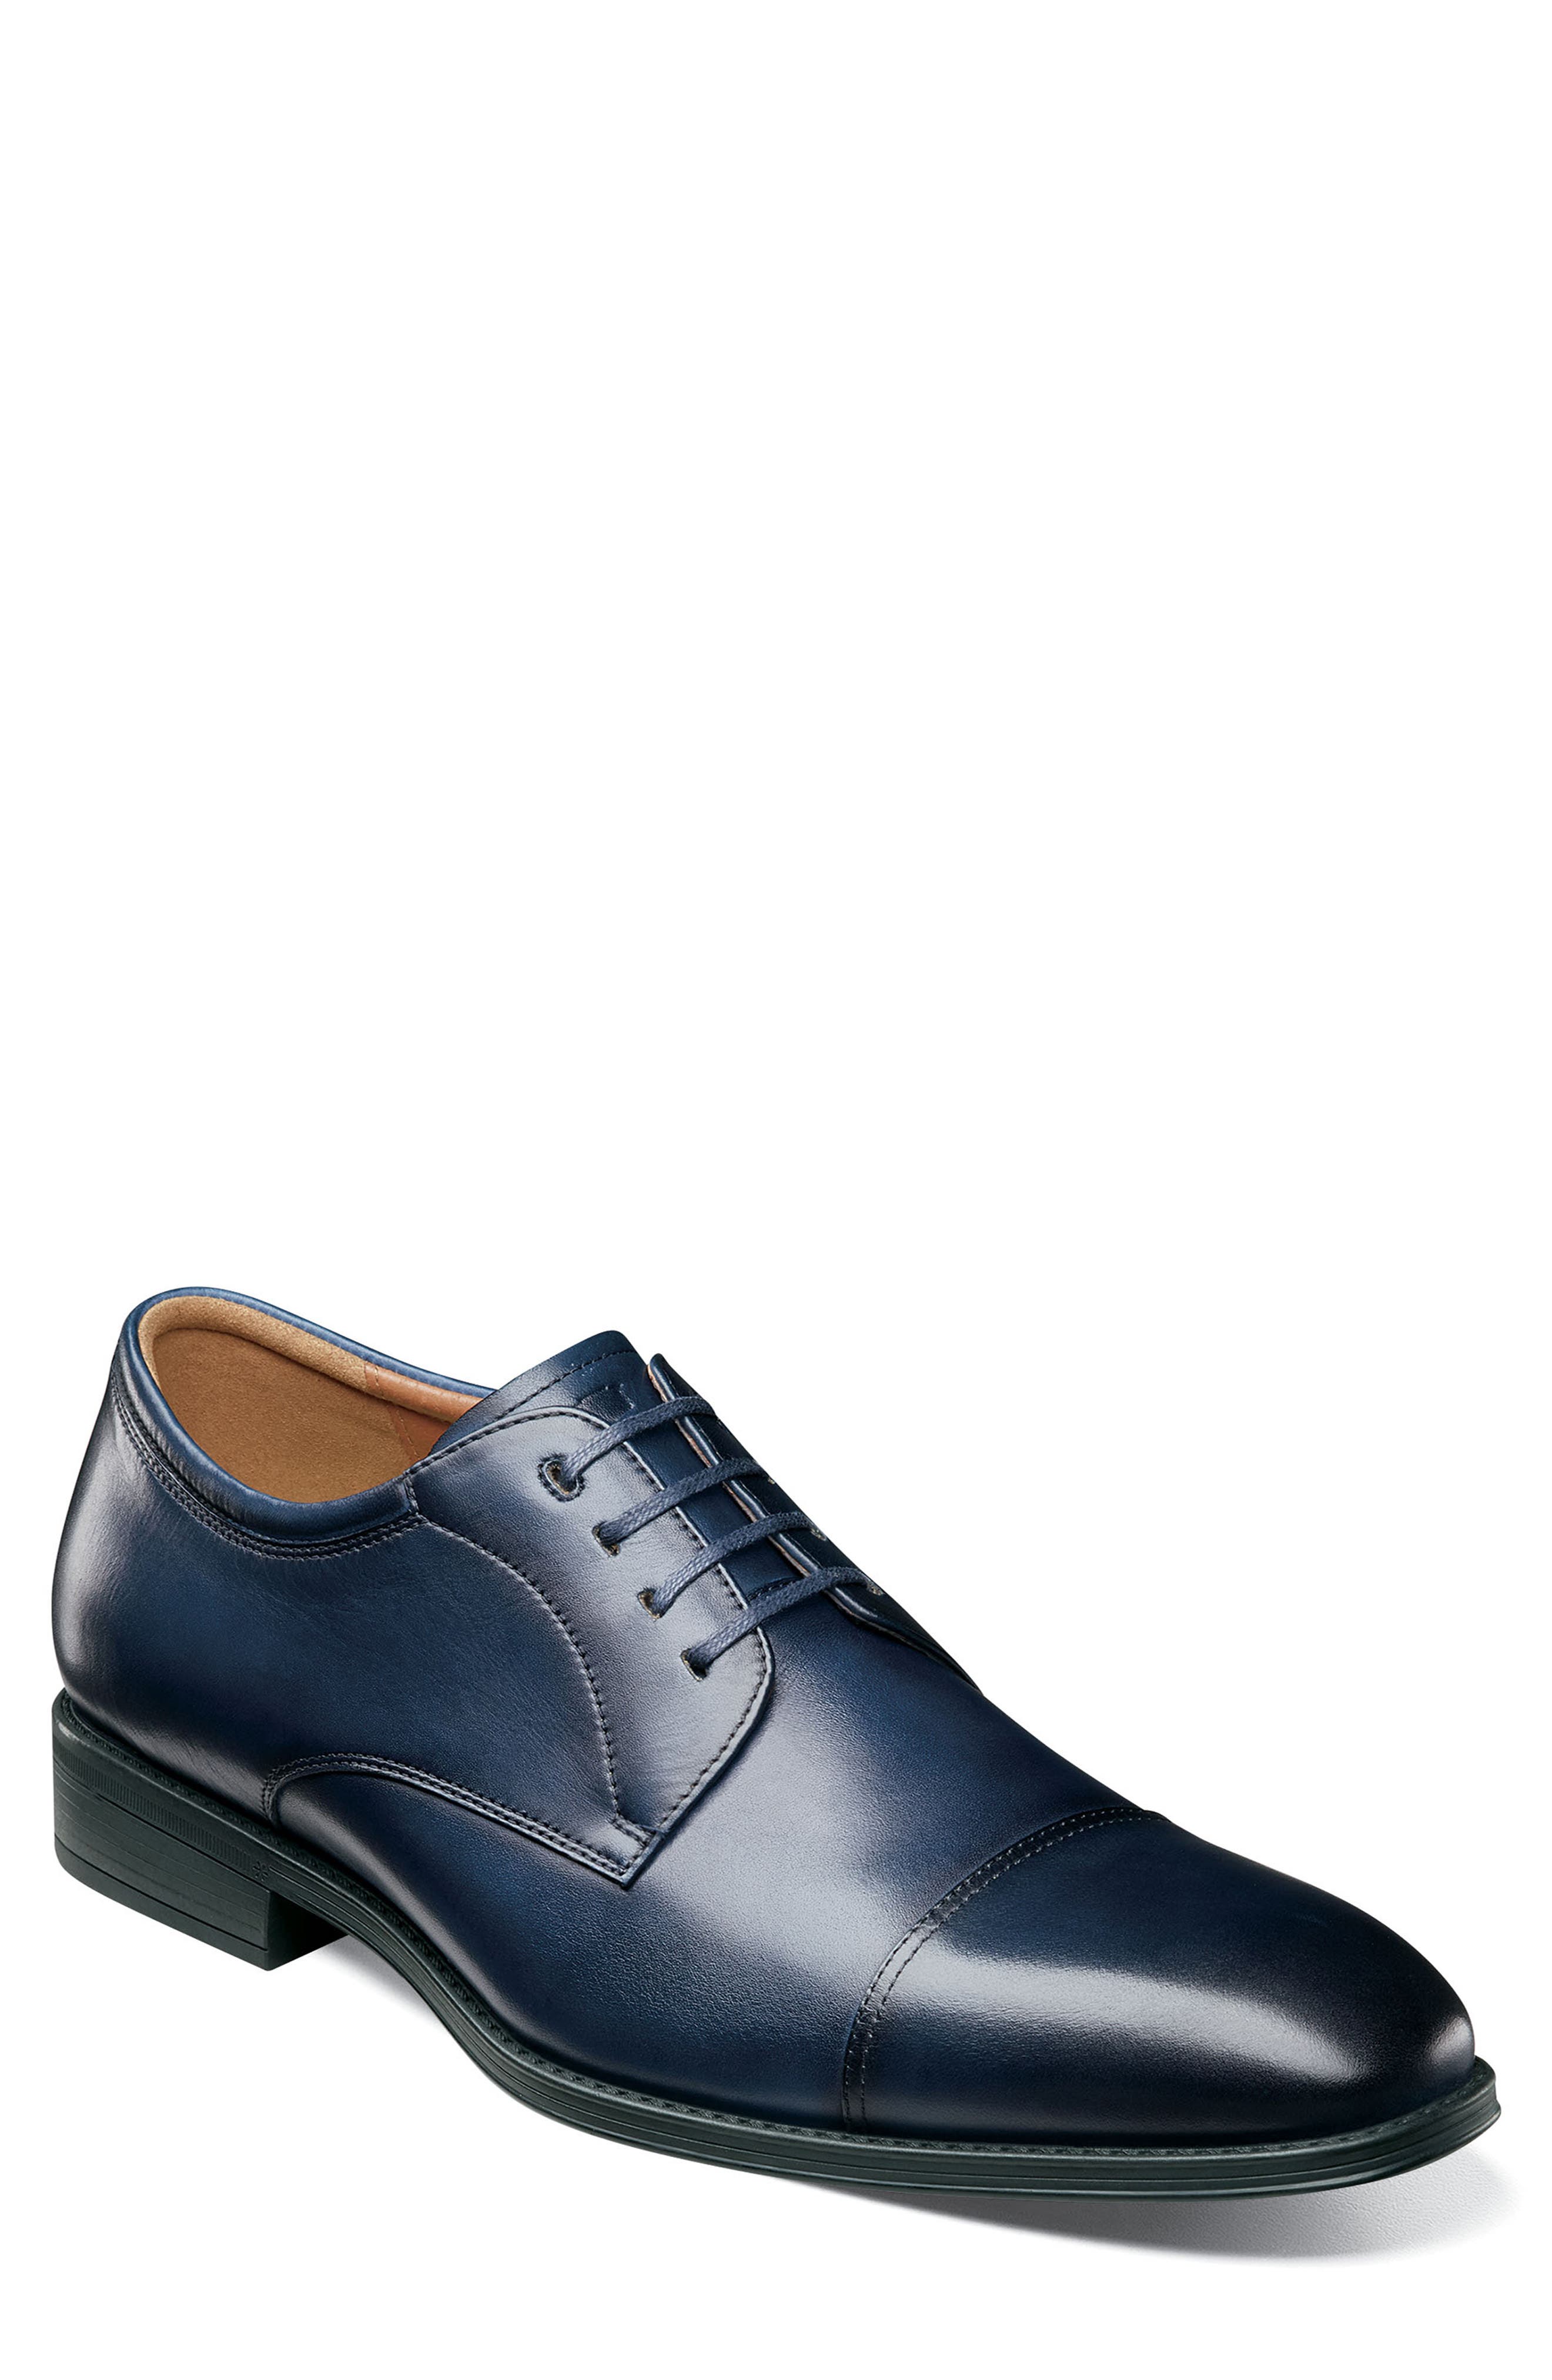 mens navy blue oxford shoes